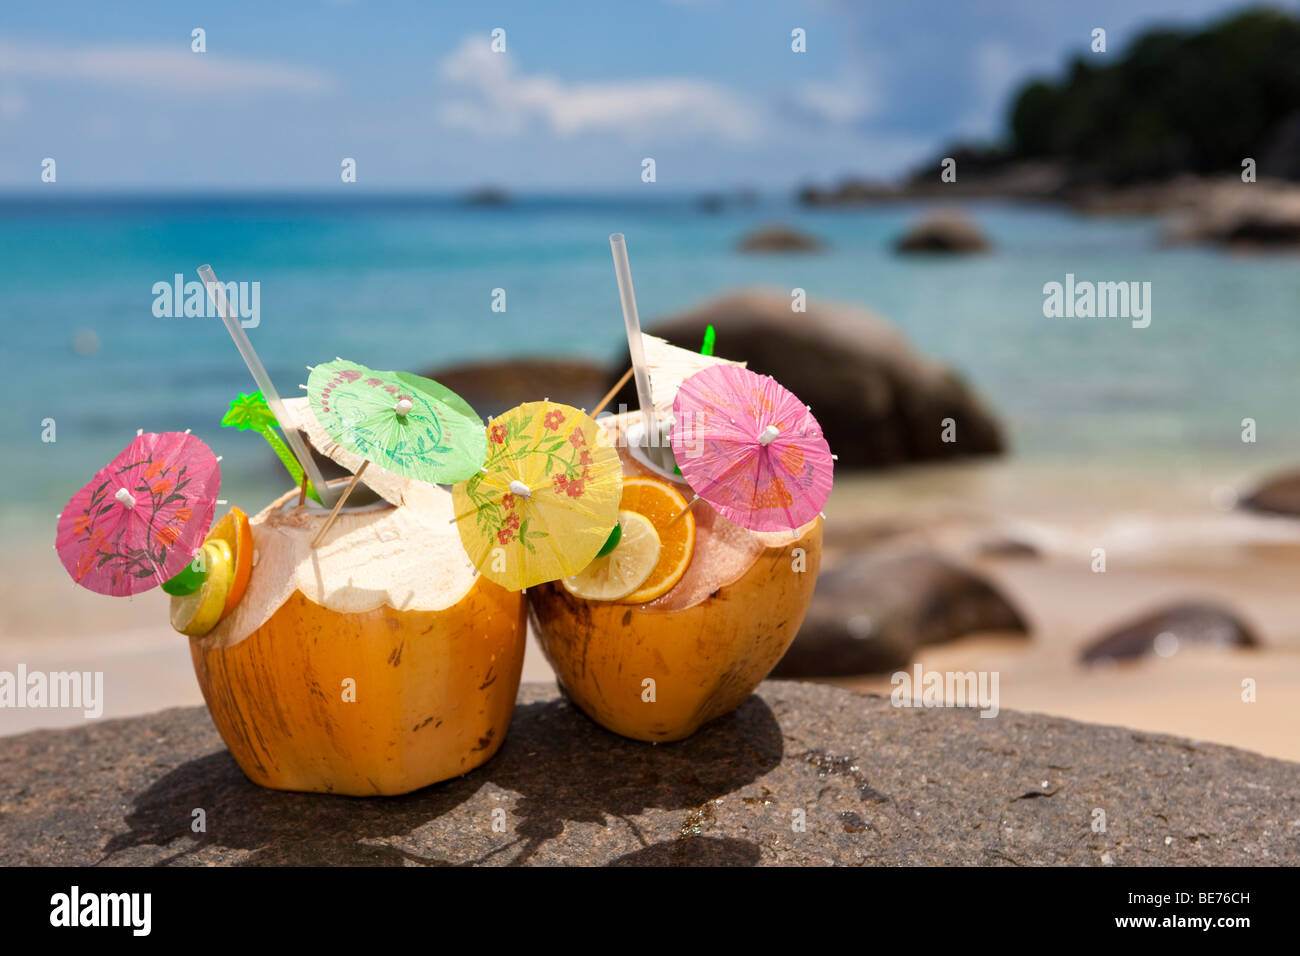 Two decorated coconuts filled with drinks standing on a granite rock, island Mahe, Seychelles, Indian Ocean, Africa Stock Photo